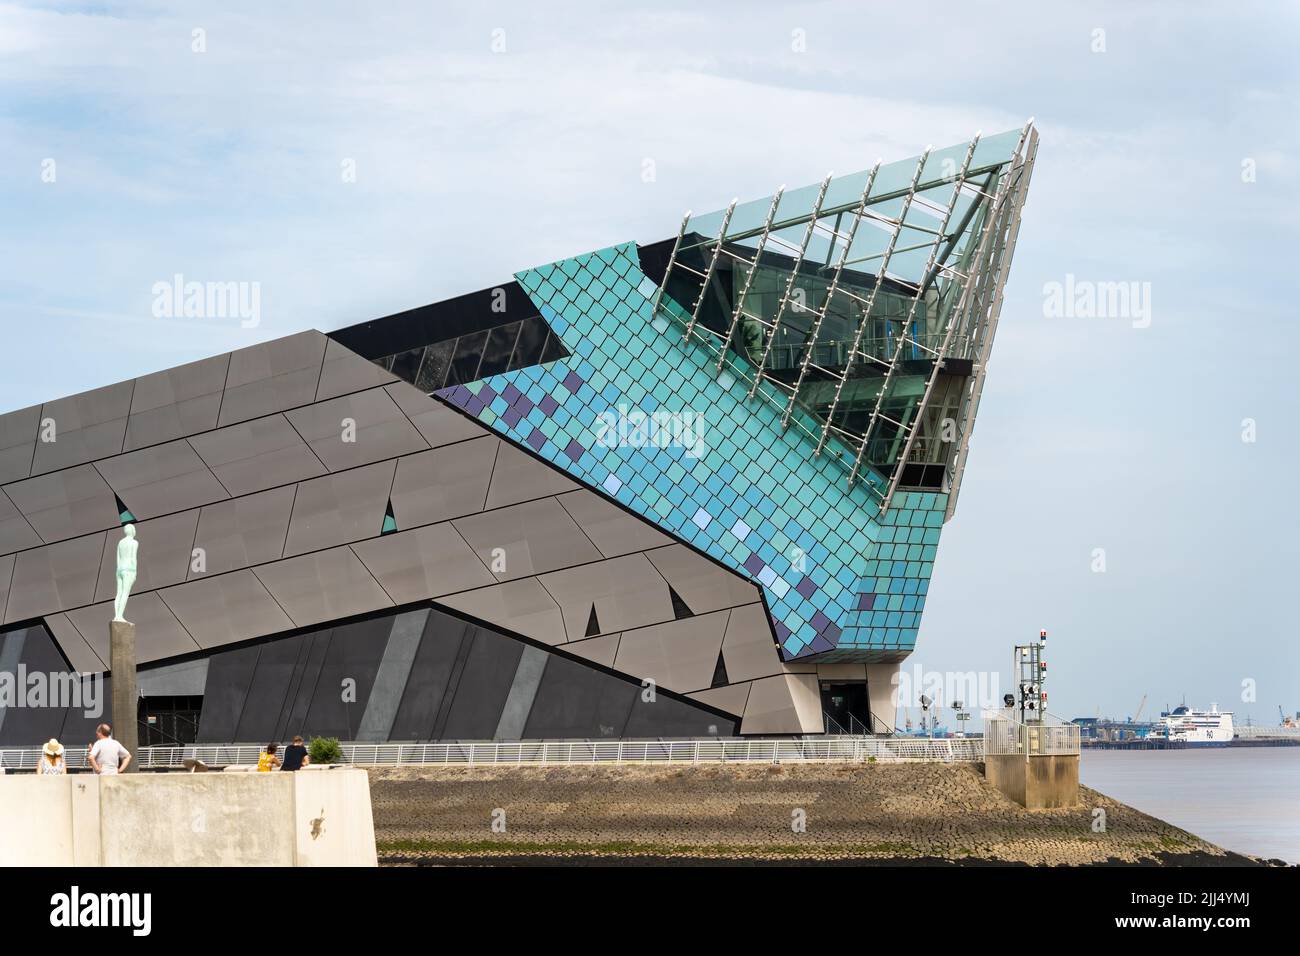 KINGSTON UPON HULL,  YORKSHIRE, UK - JULY 17: The Deep building by the marina in Kingston upon Hull on July 17, 2022. Four unidentified people Stock Photo